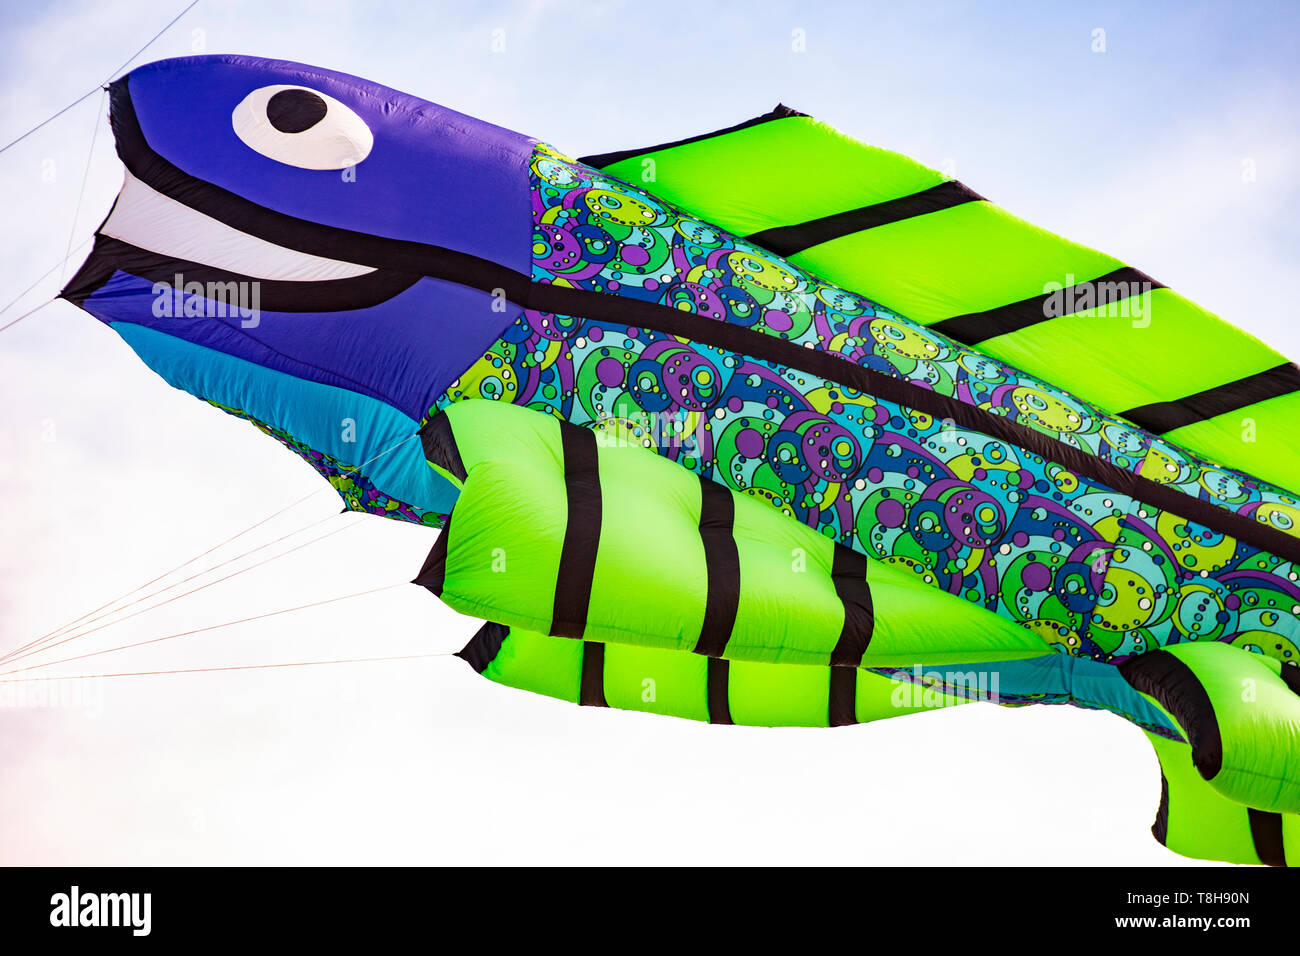 Flying kite with Fish-shaped colored green and purple Stock Photo